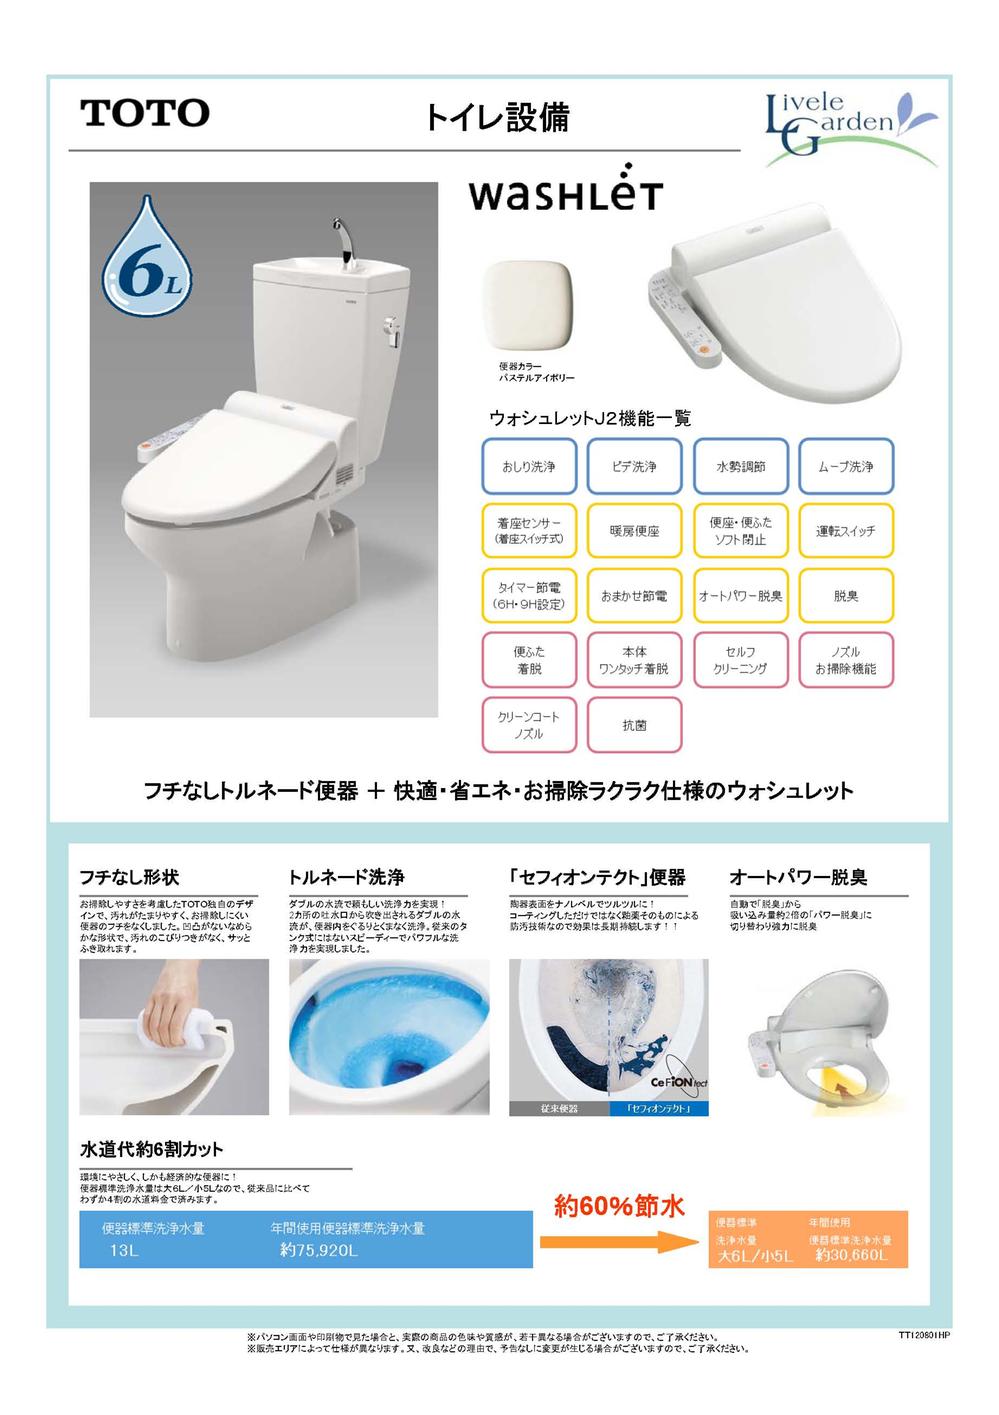 Other Equipment. Borderless tornado toilet + comfortable ・ Energy saving ・ It is Washlet of cleaning Ease specification.